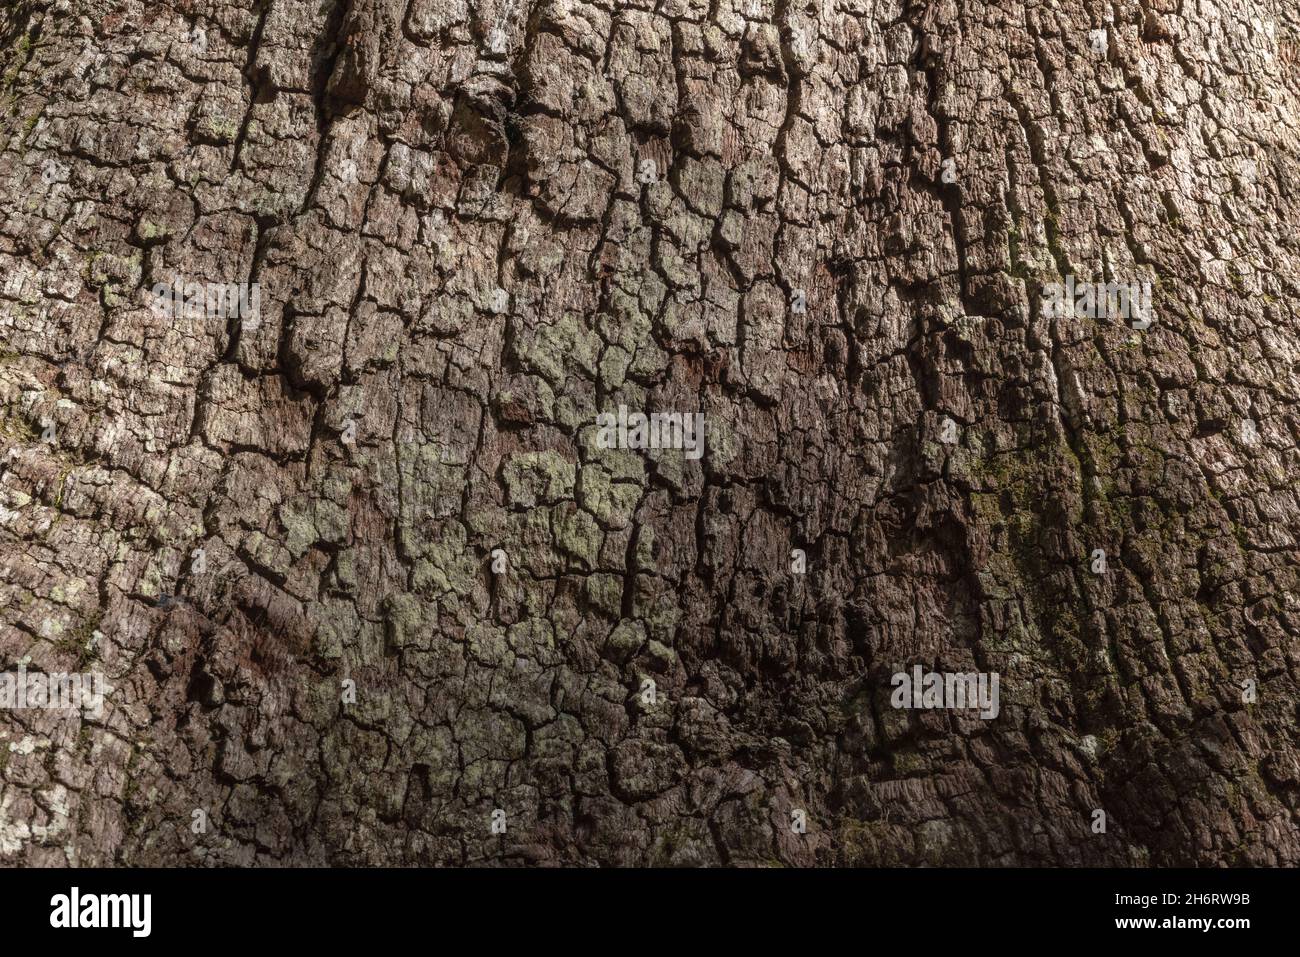 A close-up of the texture of tree bark photographed at historic Blakeley State Park near Spanish Fort, Alabama. Stock Photo